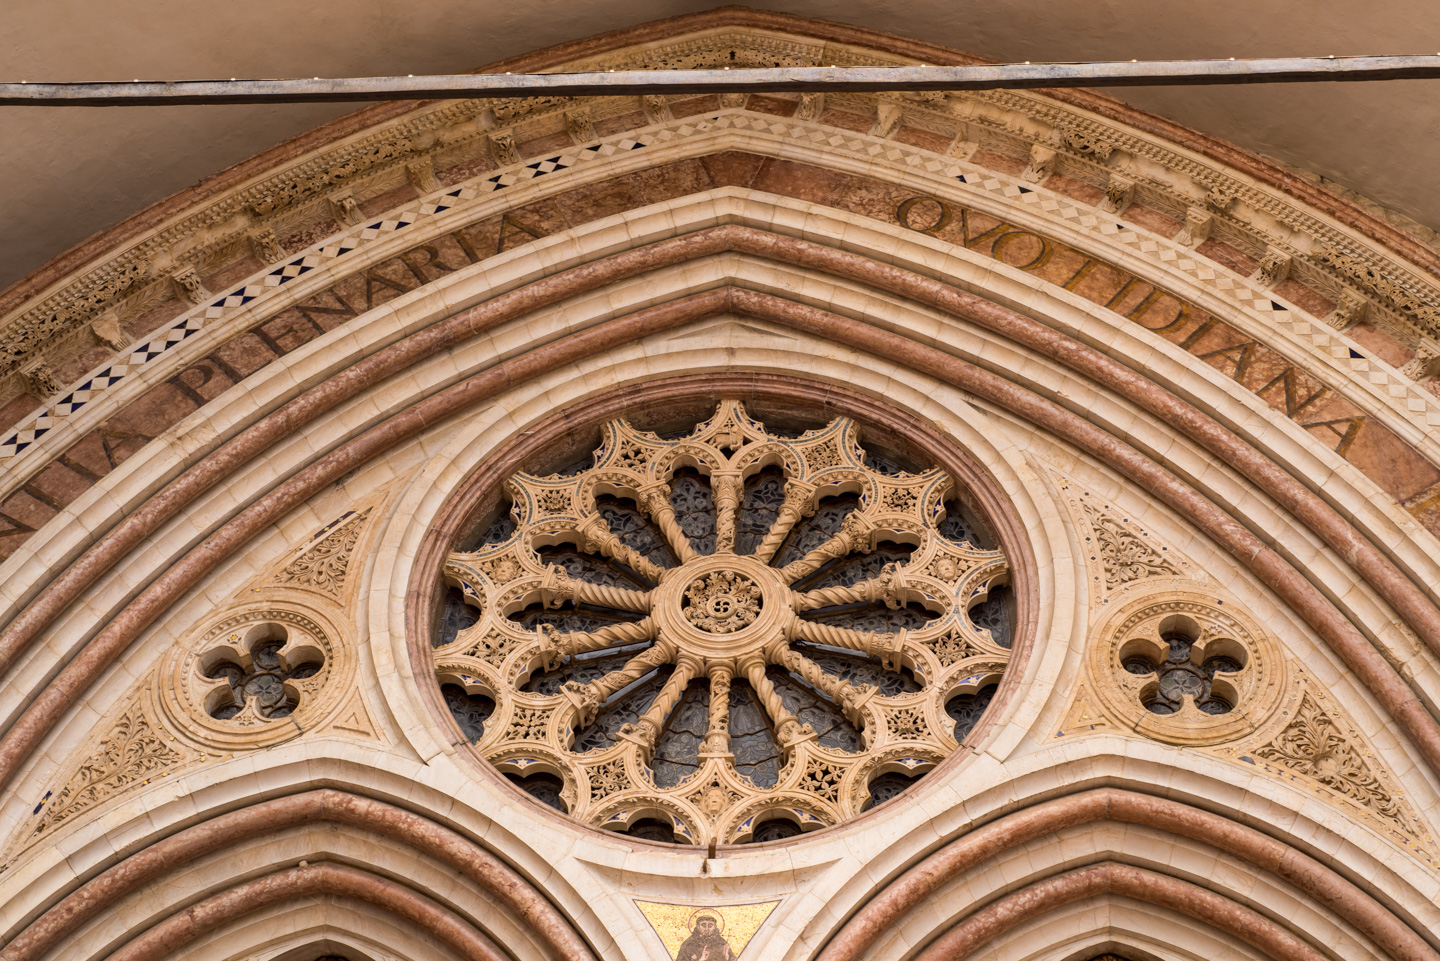 Rose window in the Basilica of St Francis